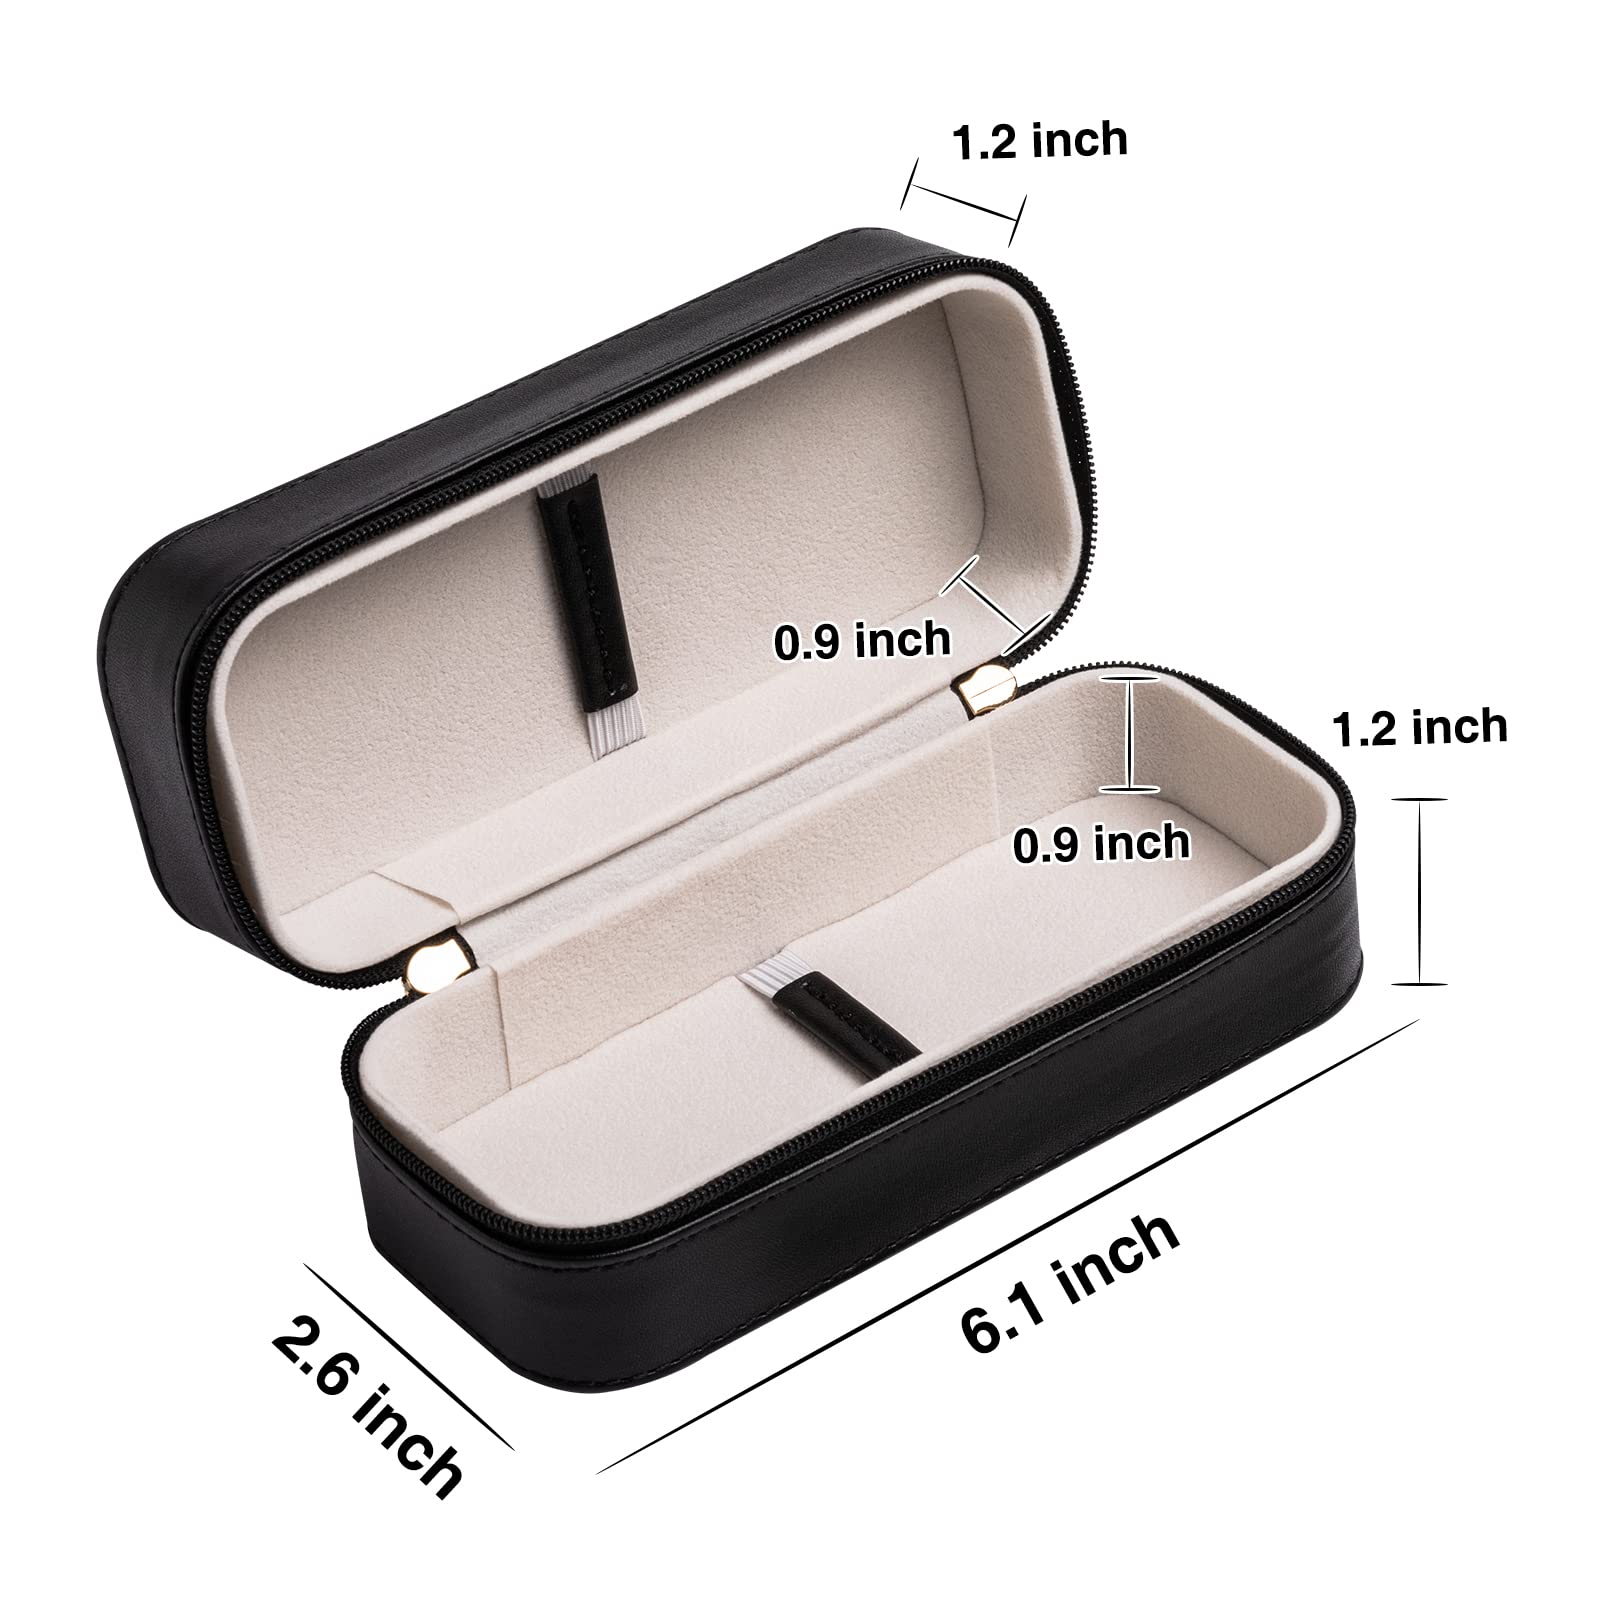 Small Single Leather Portable Watch Travel Case Watch Band Accessories Display Storage Holder Box for Wrist Watch